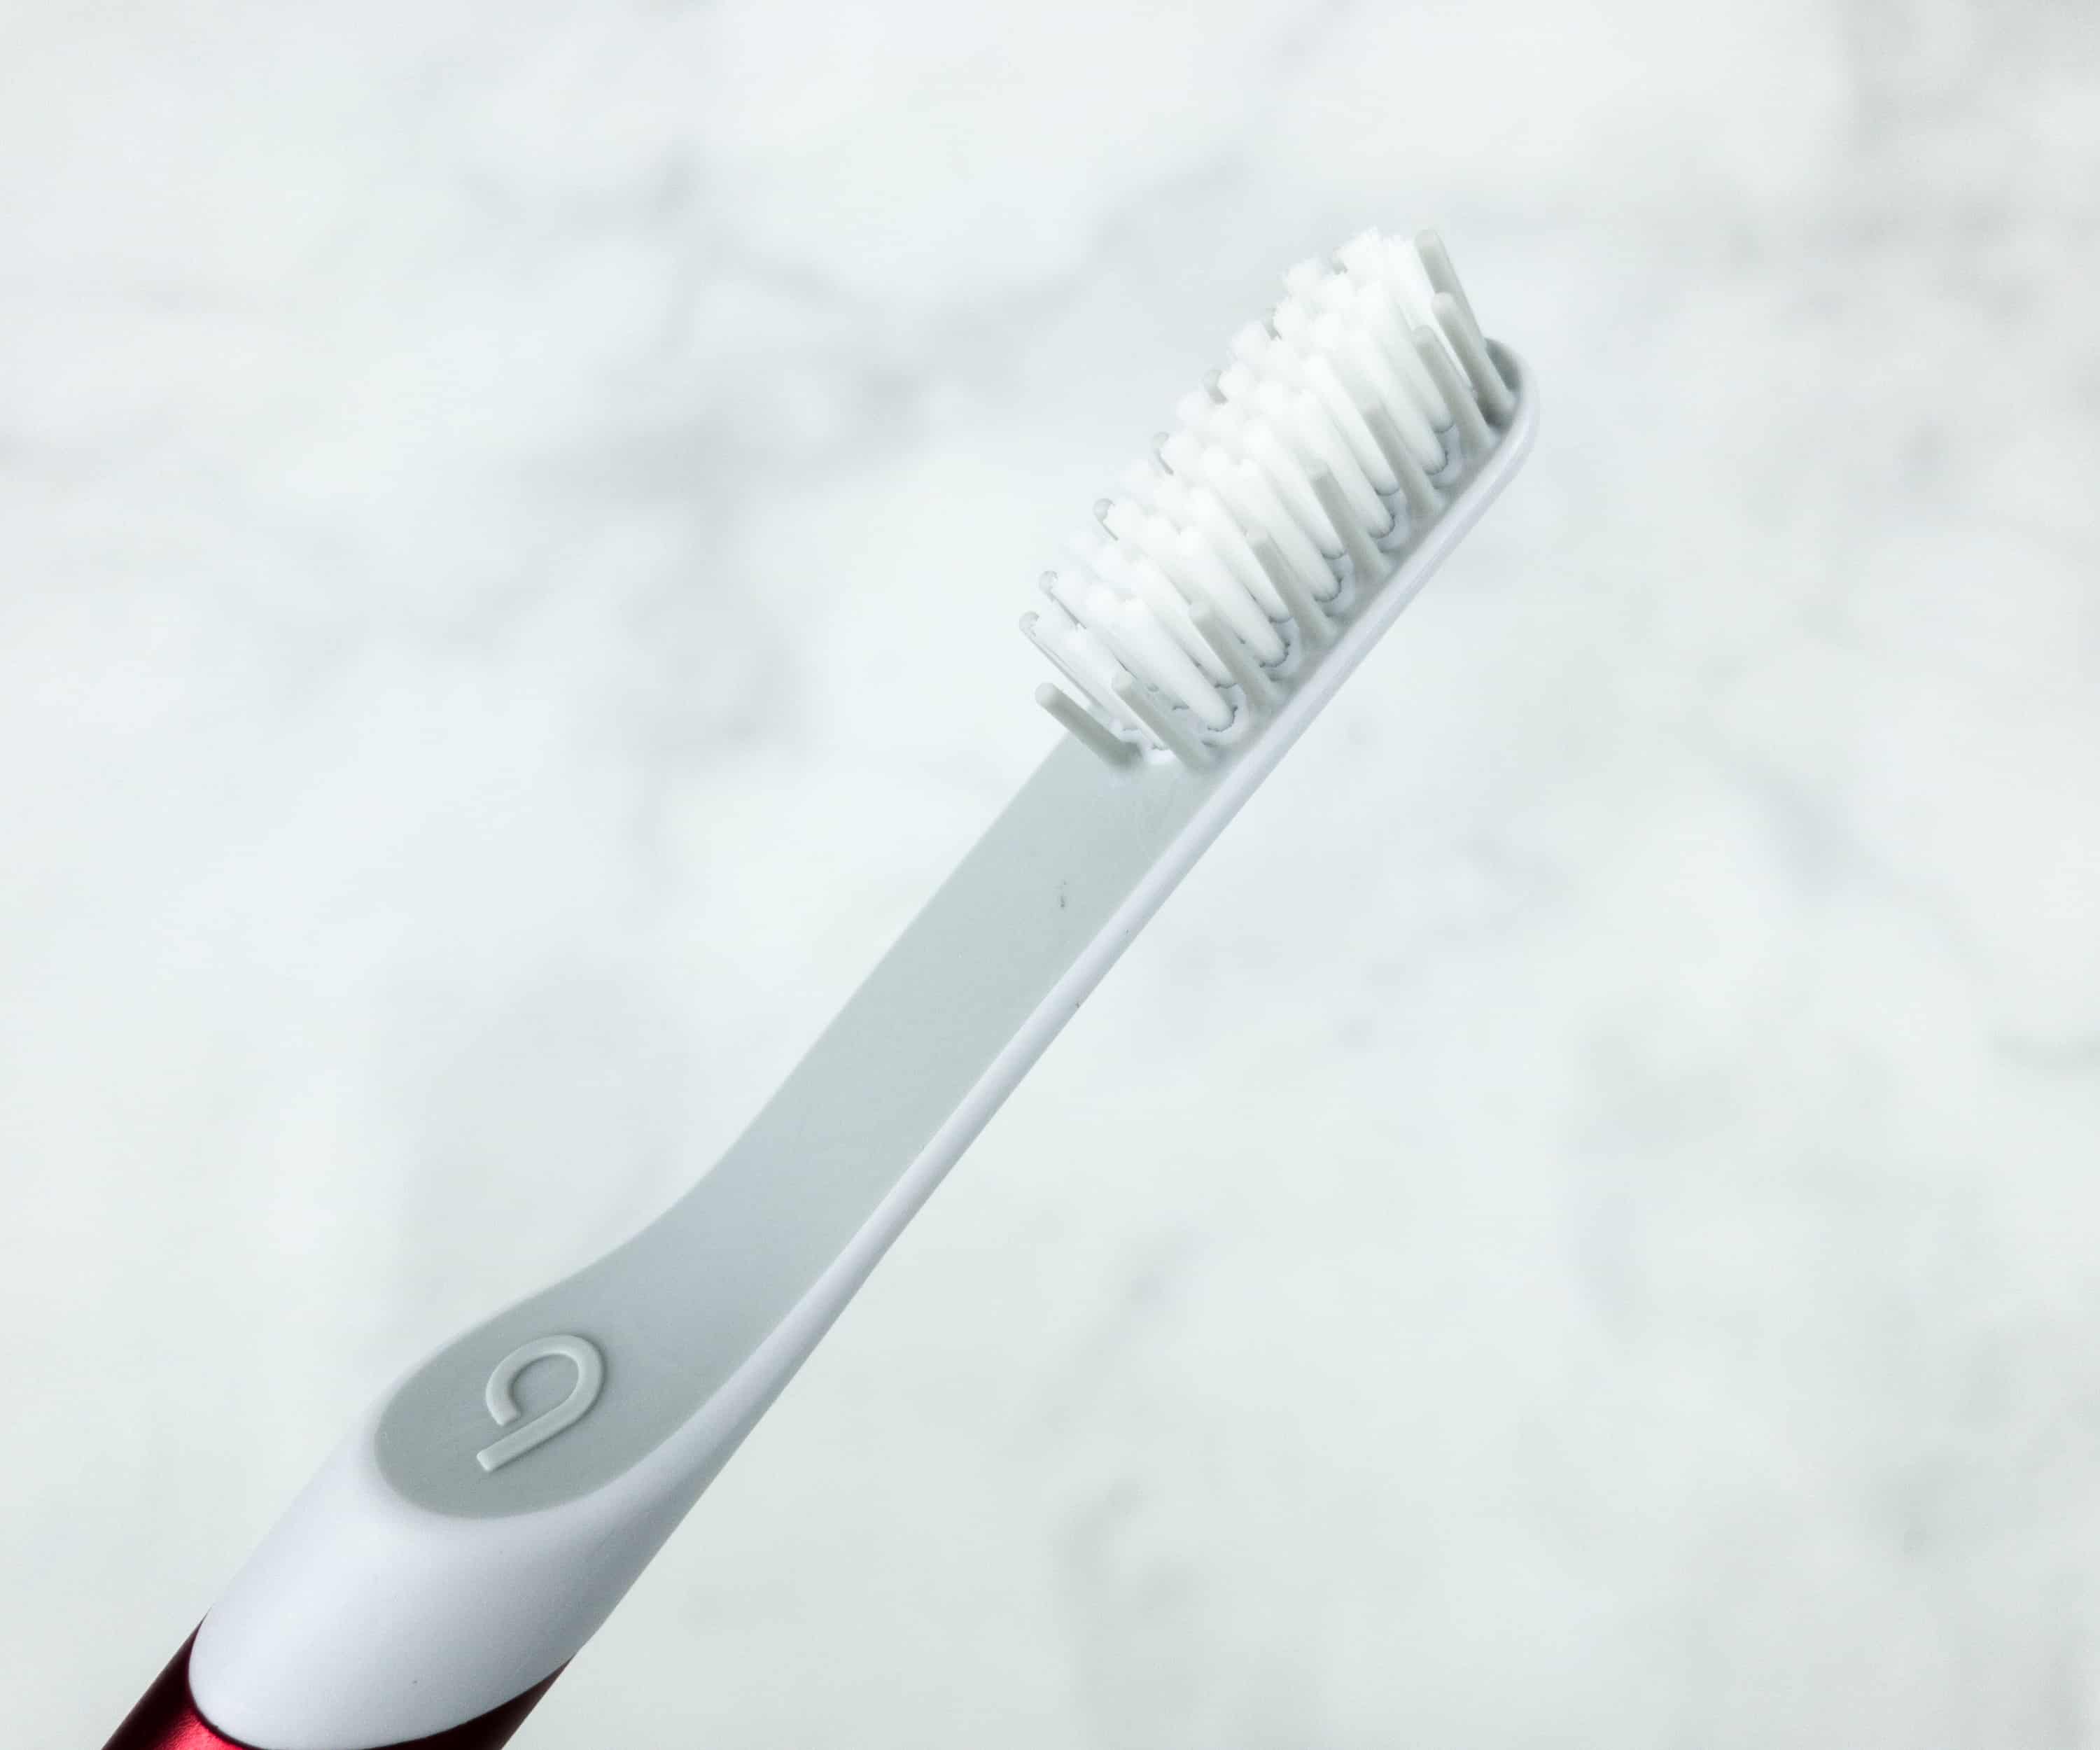 quip toothbrush reviews by dentists